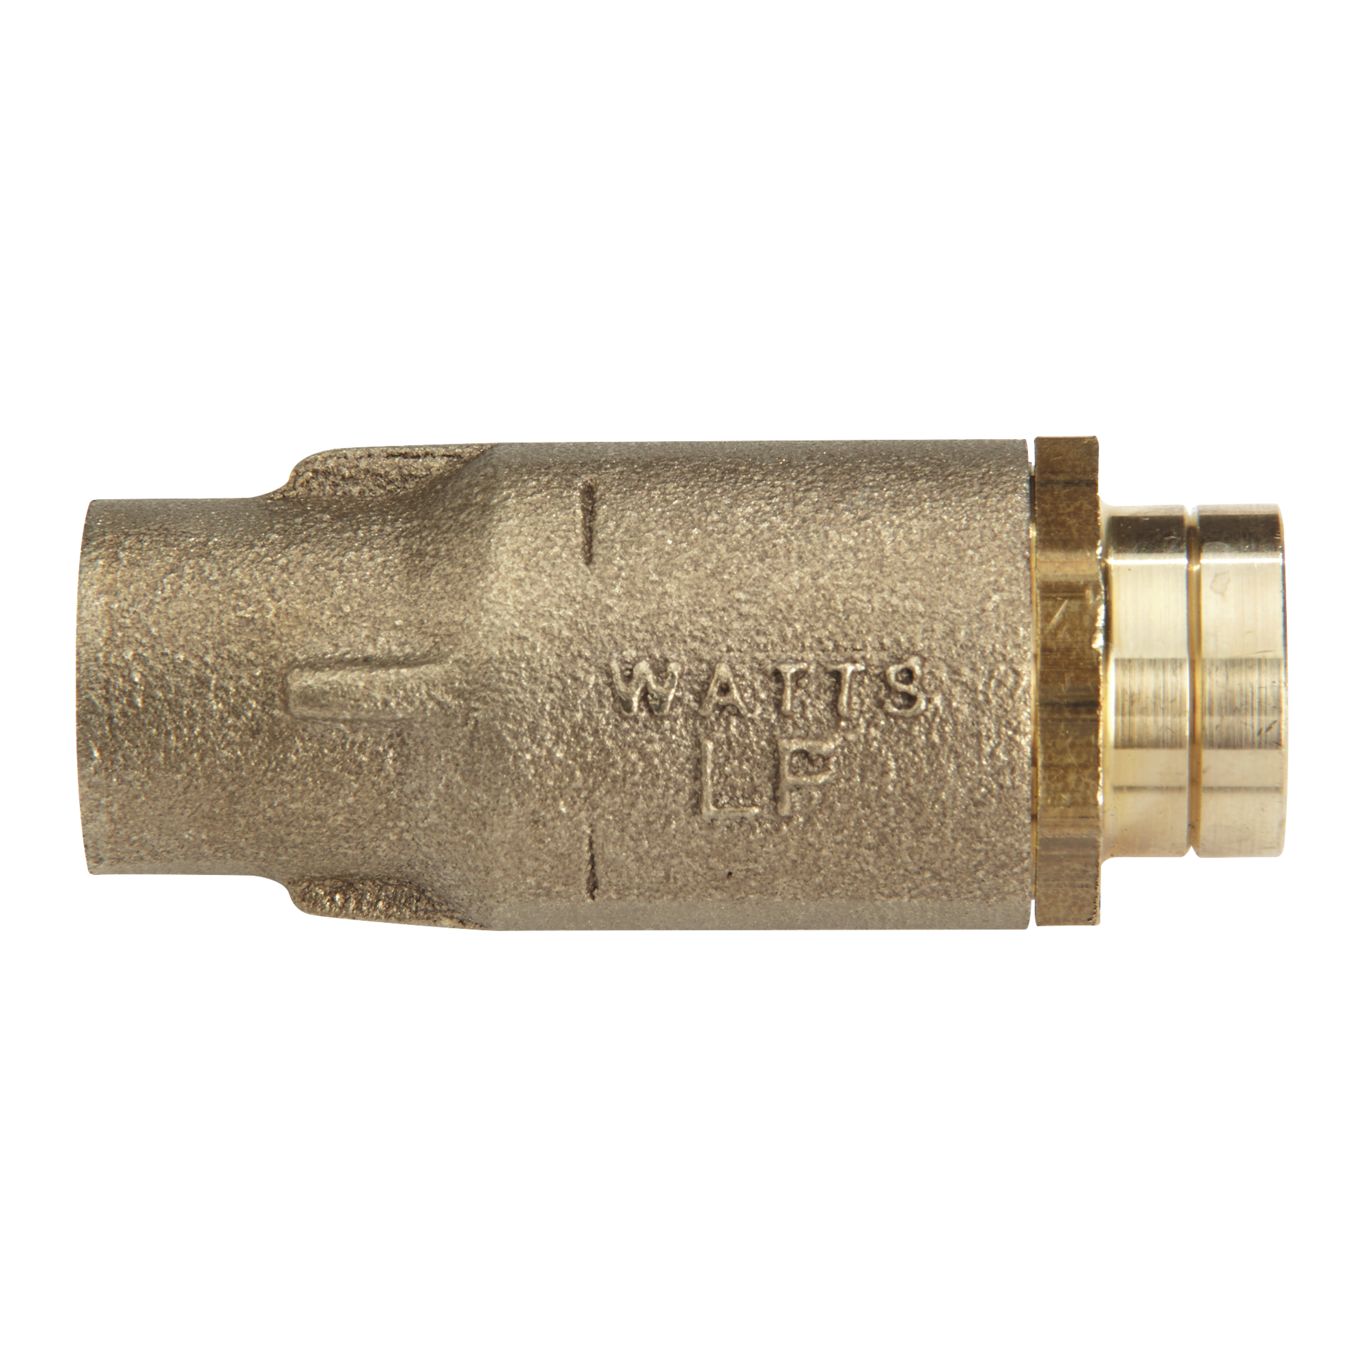 0555183 - 1 In Lead Free Brass Silent Check Valve, Viton Disc, Solder End Connections